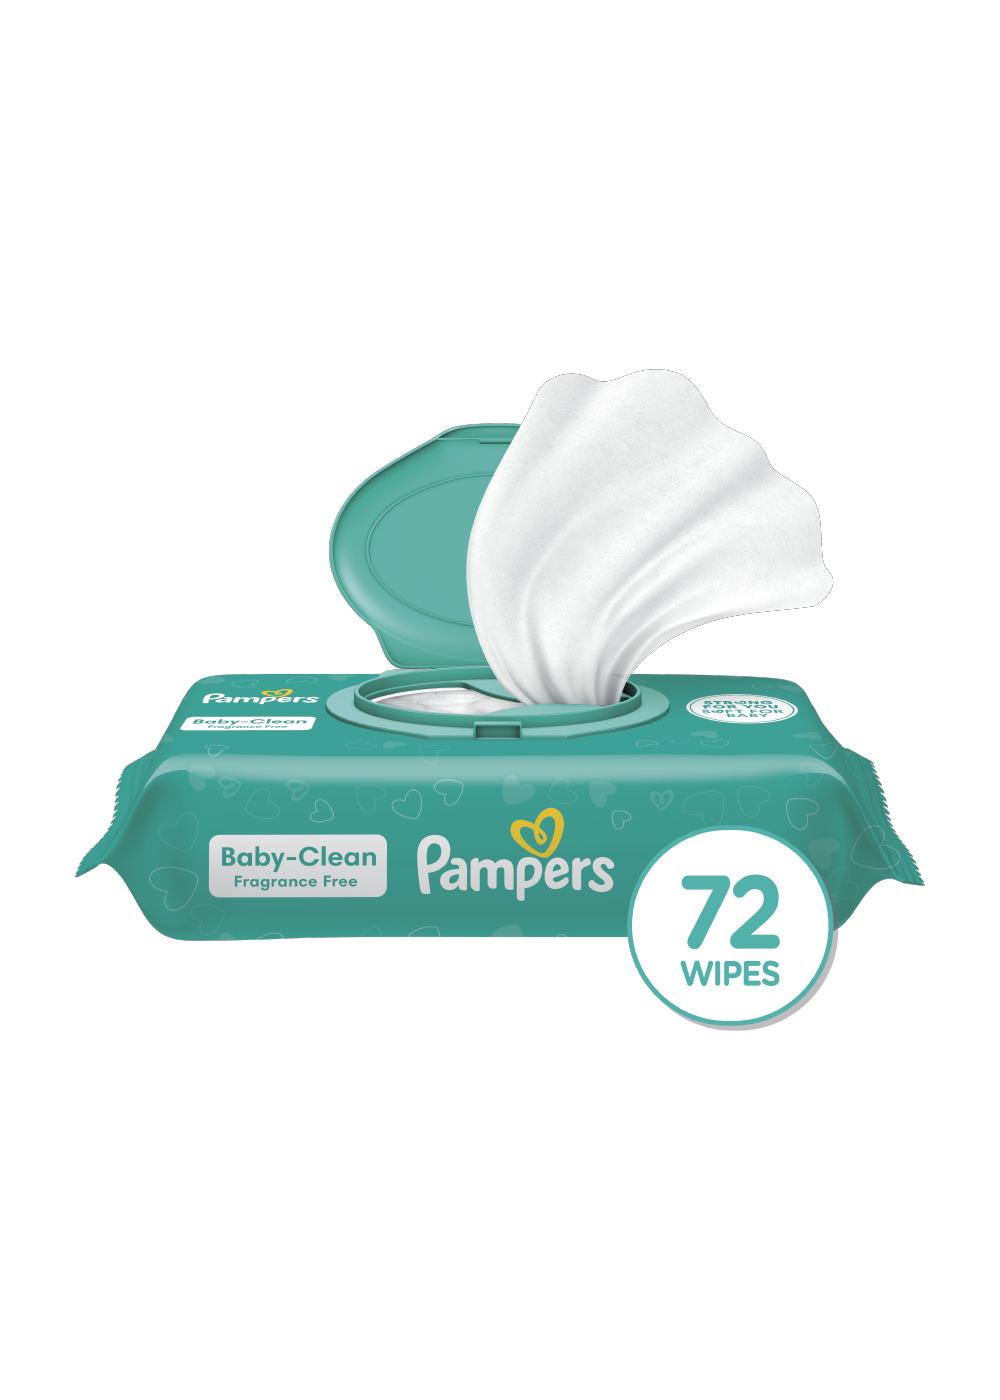 Pampers Baby Wipes - Fragrance Free; image 6 of 10